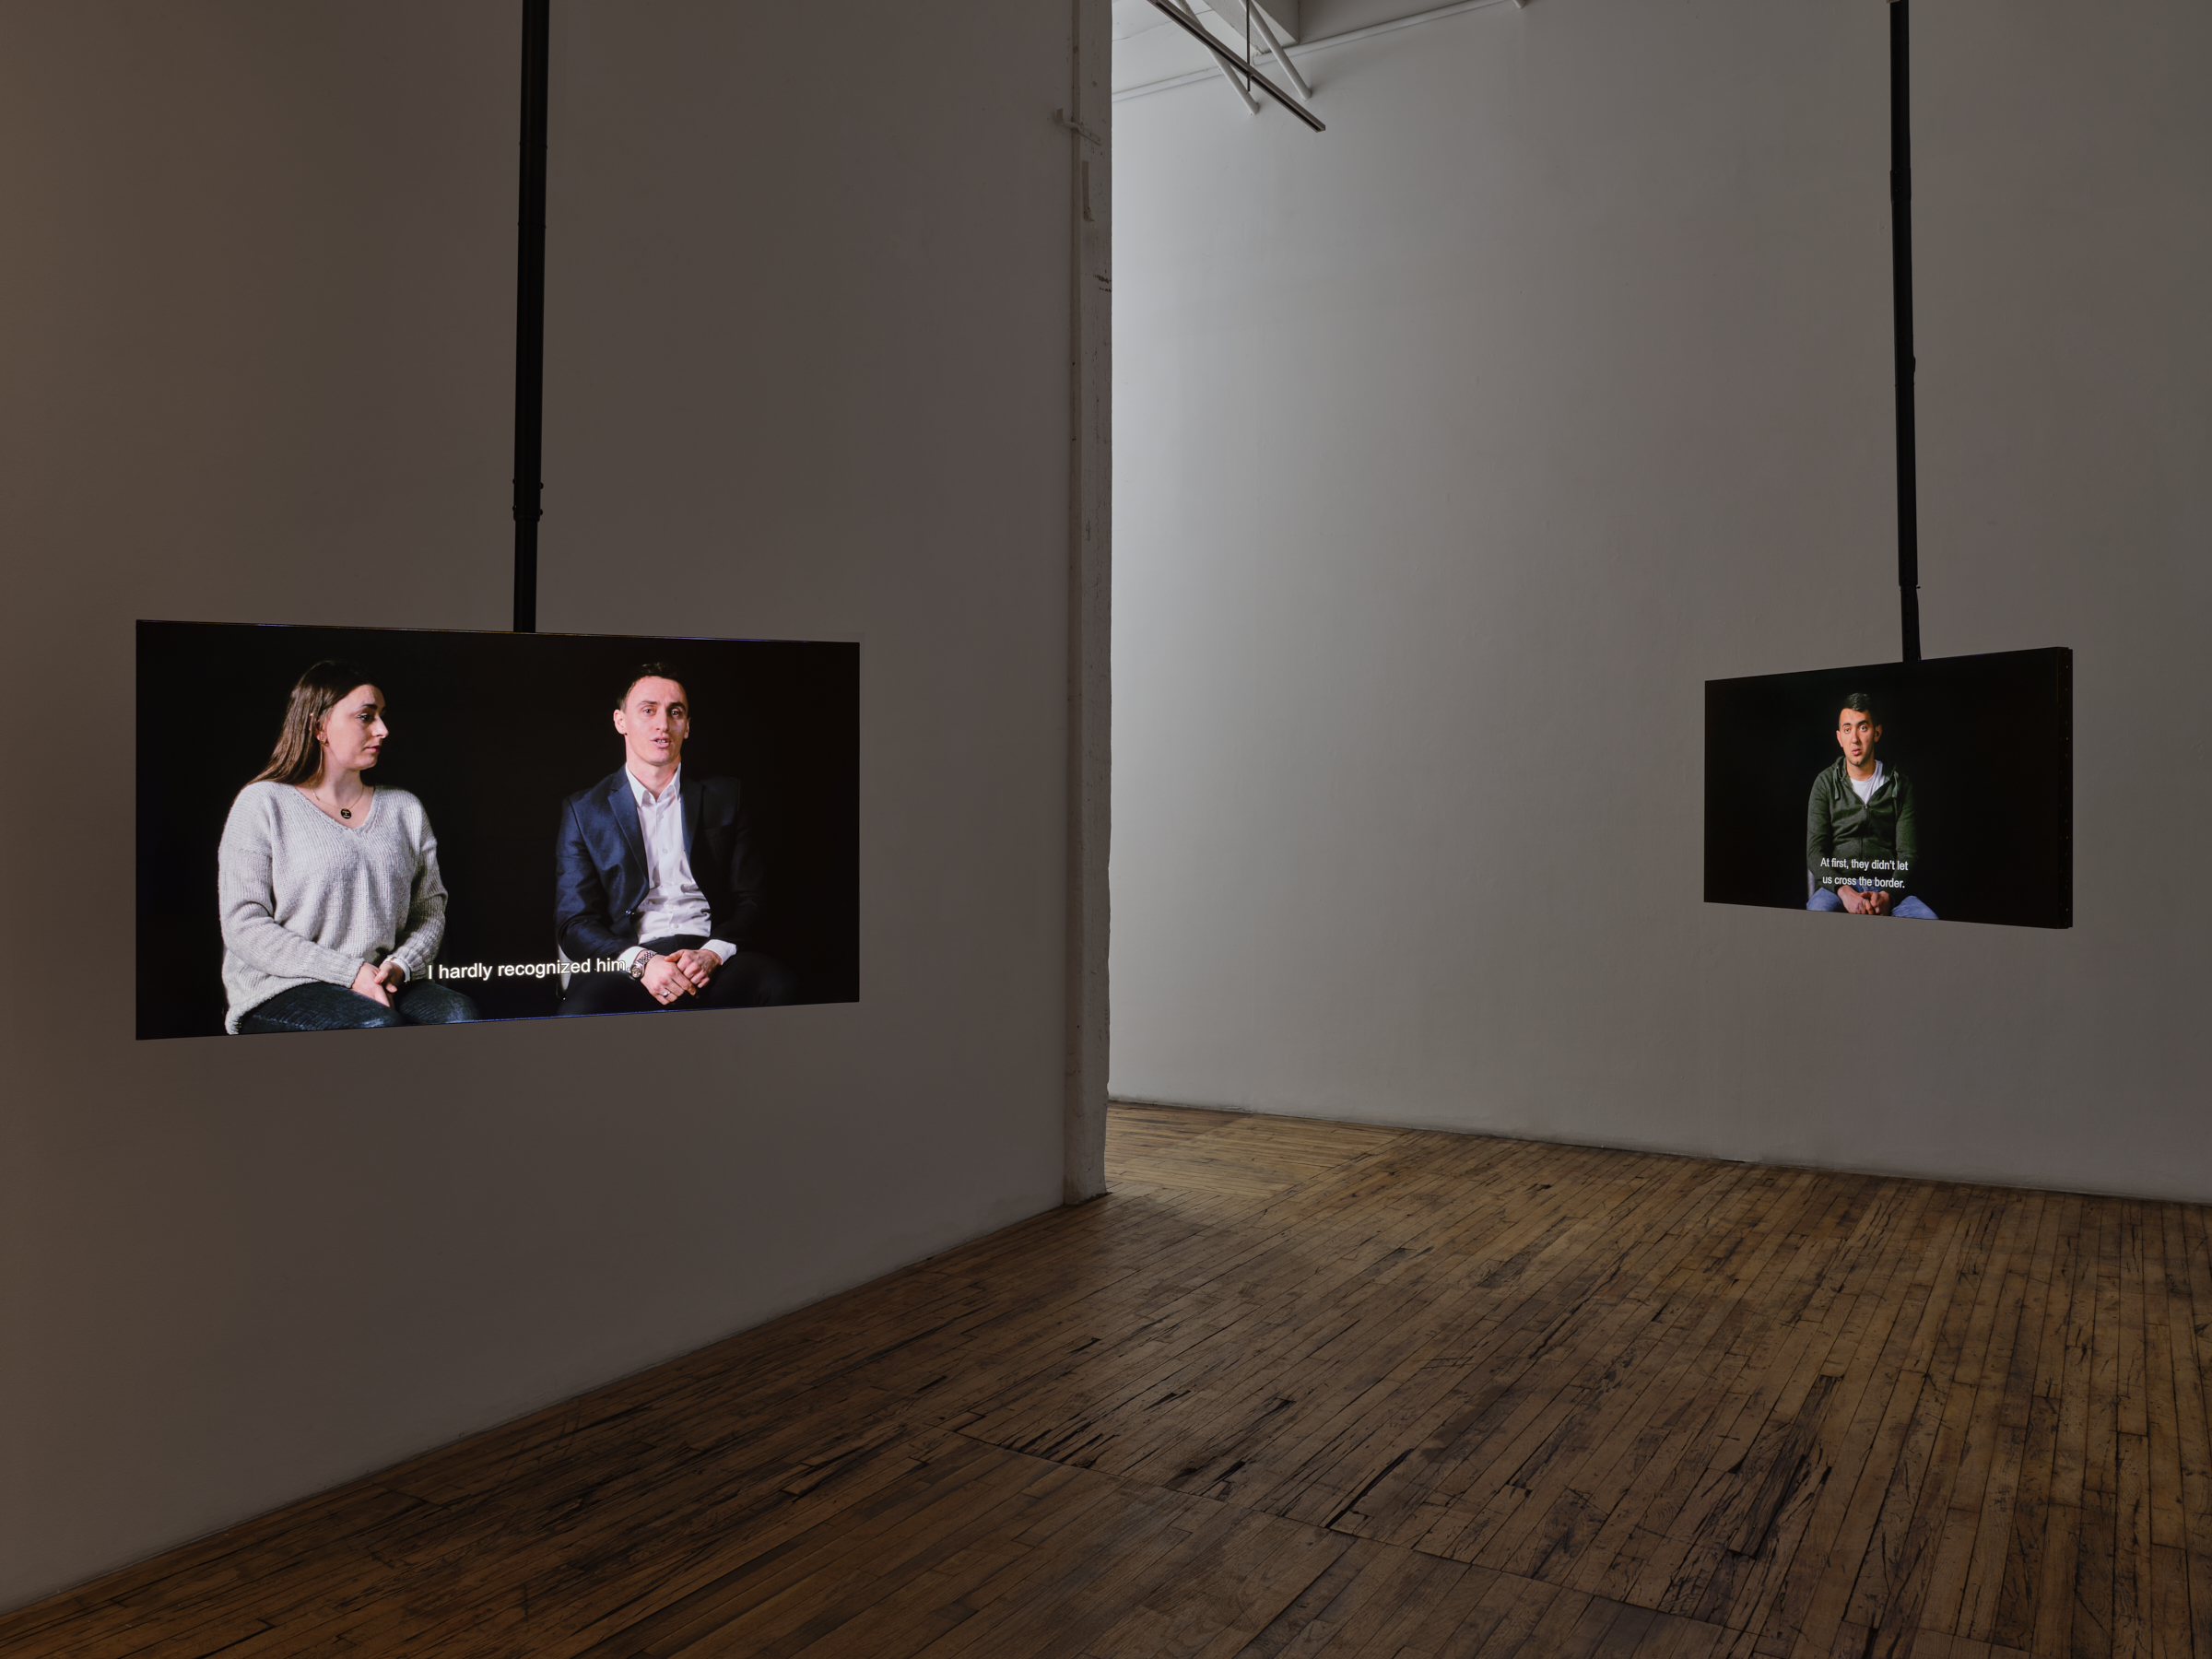 In a white room with wooden floors, two tv screens are hanging. The left screen shows two Kosovars talking to the camera, with the caption reading 